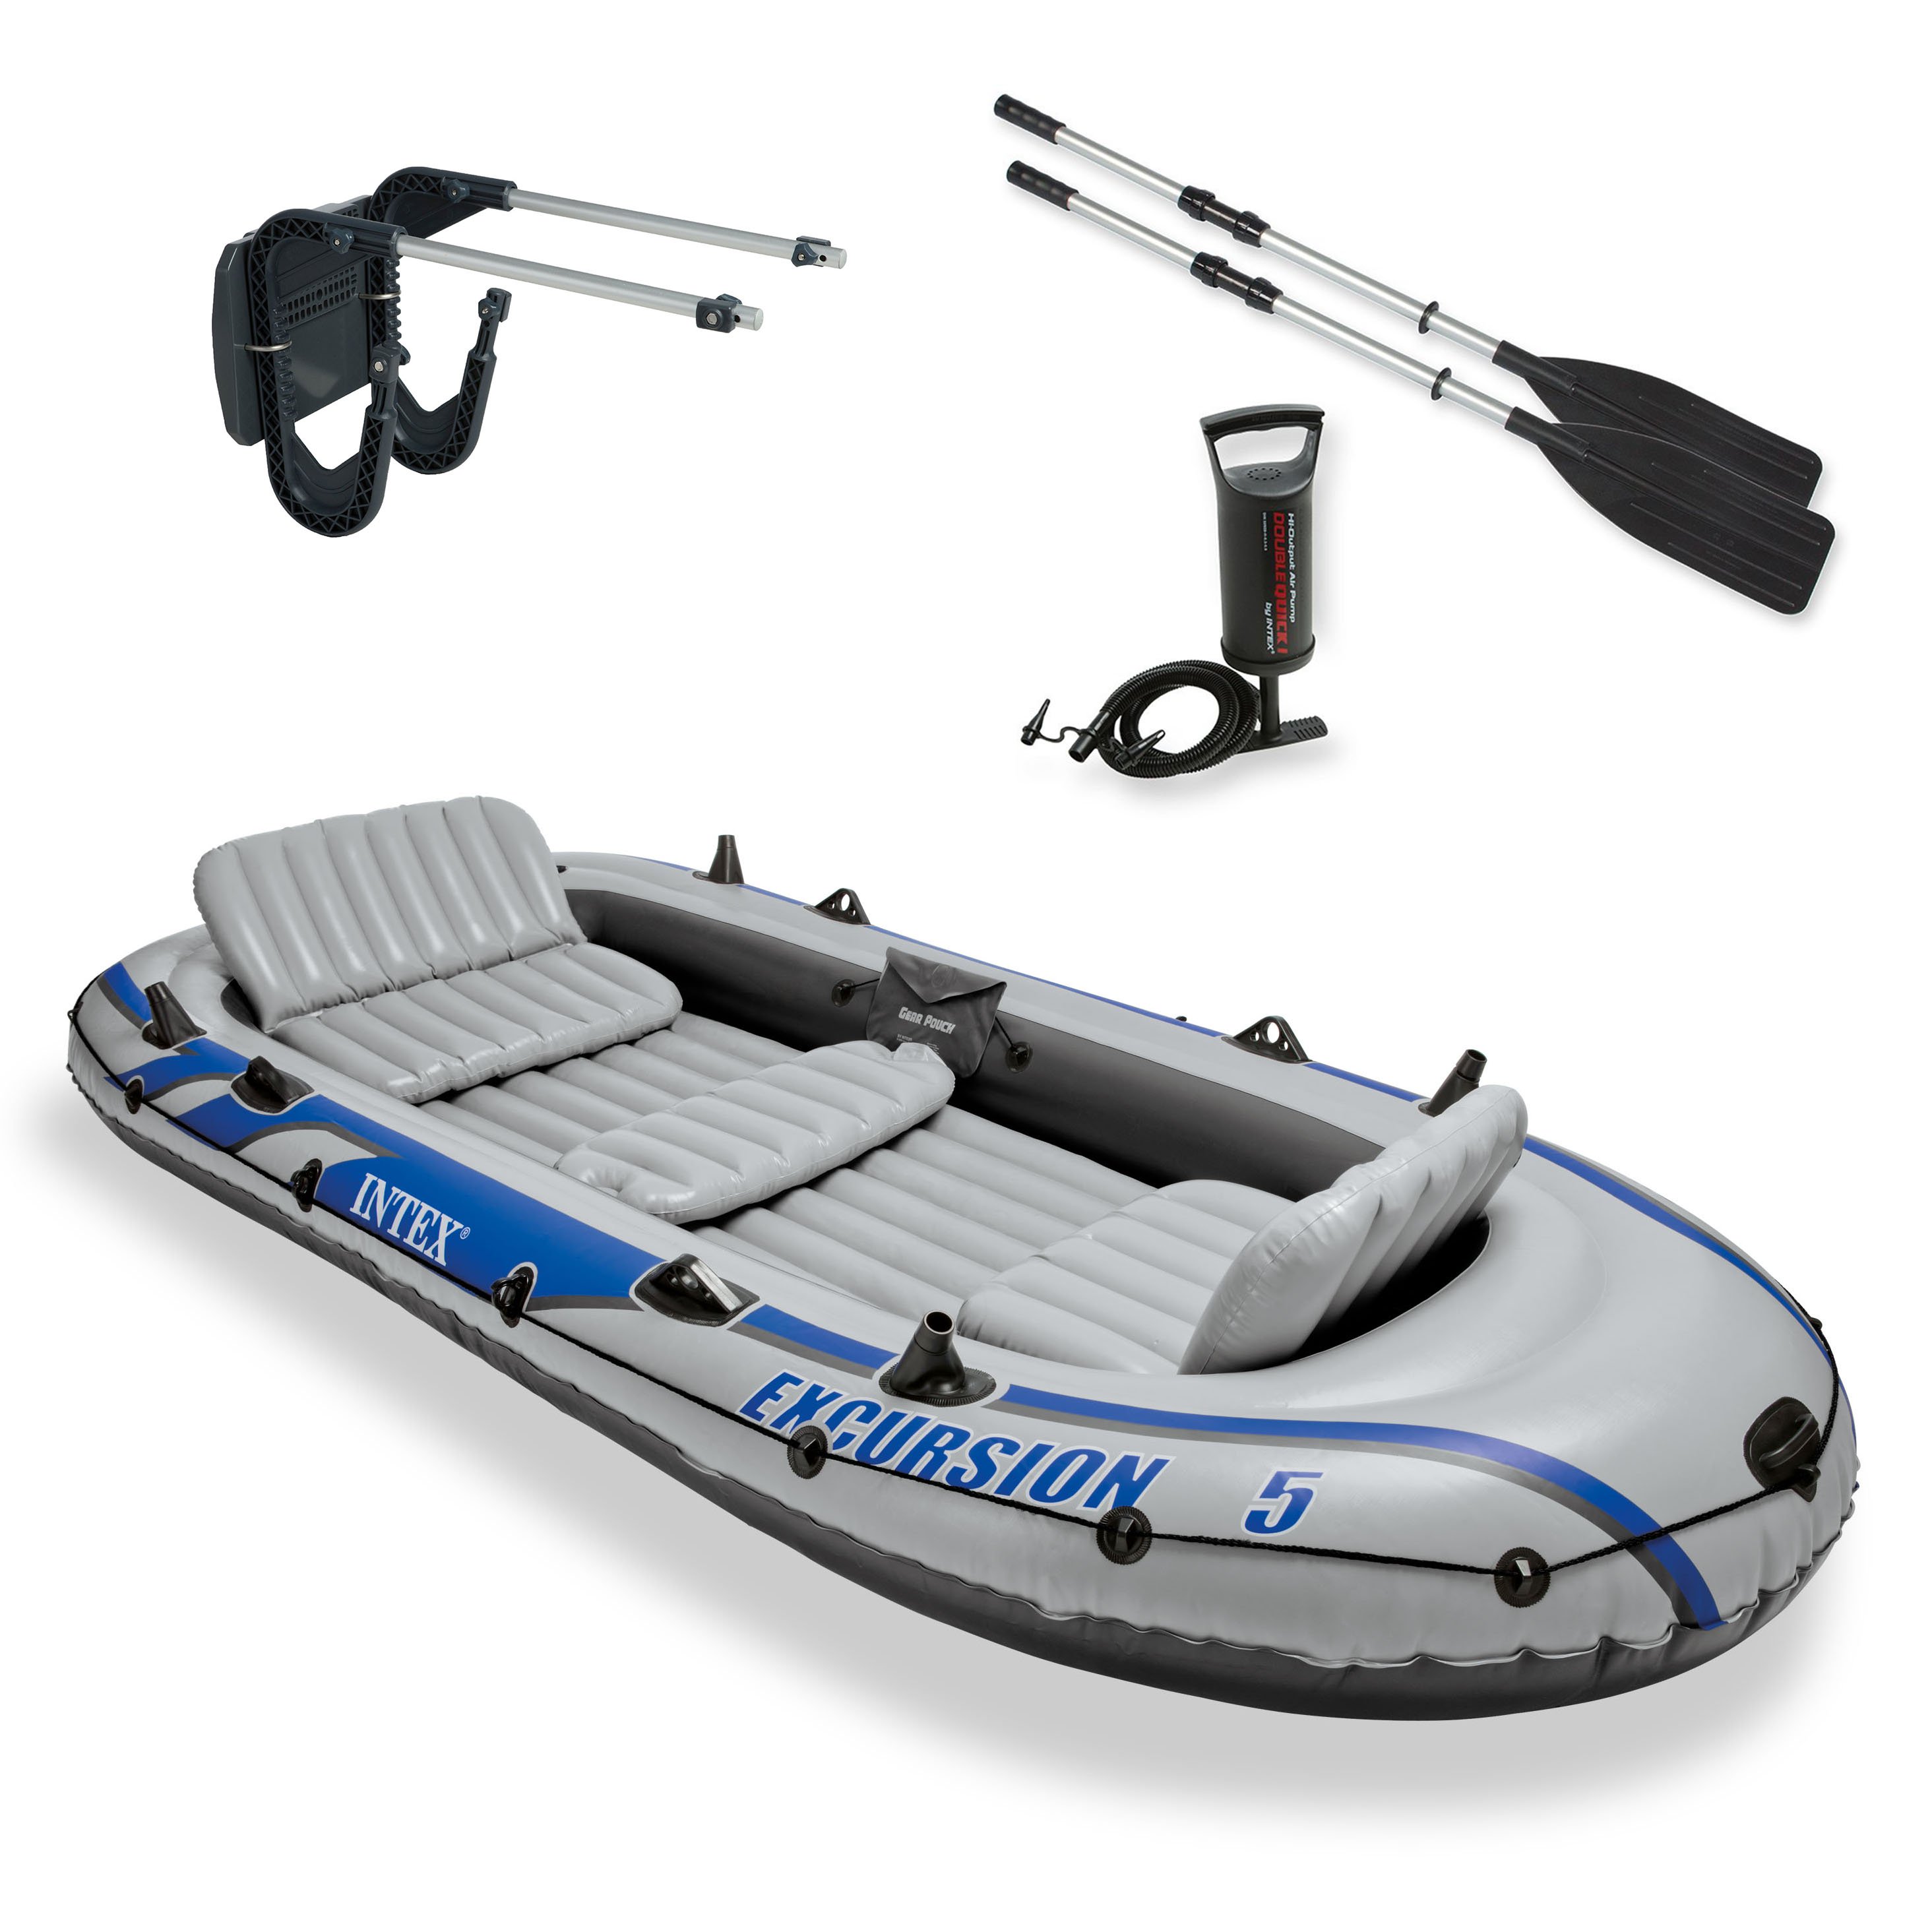 Intex Excursion 5 Inflatable Rafting and Fishing Boat with Oars + Motor Mount
Intex Excursion 5 Inflatable Rafting and Fishing Boat with Oars + Motor Mount
Intex Excursion 5 Inflatable Rafting and Fishing Boat with Oars + Motor Mount
Intex Excursion 5 Inflatable Rafting and Fishing Boat with Oars + Motor Mount
Intex Excursion 5 Inflatable Rafting and Fishing Boat with Oars + Motor Mount
Intex Excursion 5 Inflatable Rafting and Fishing Boat with Oars + Motor Mount
Intex Excursion 5 Inflatable Rafting and Fishing Boat with Oars + Motor Mount
	
Gatorade Classic Cooler, 1/2 Gallon, 1 Count
2
$11.98$11.98WAS $13.99$13.99
Shop Now
Intex Excursion 5 Inflatable Rafting and Fishing Boat with Oars + Motor Mount thebookongonefishing